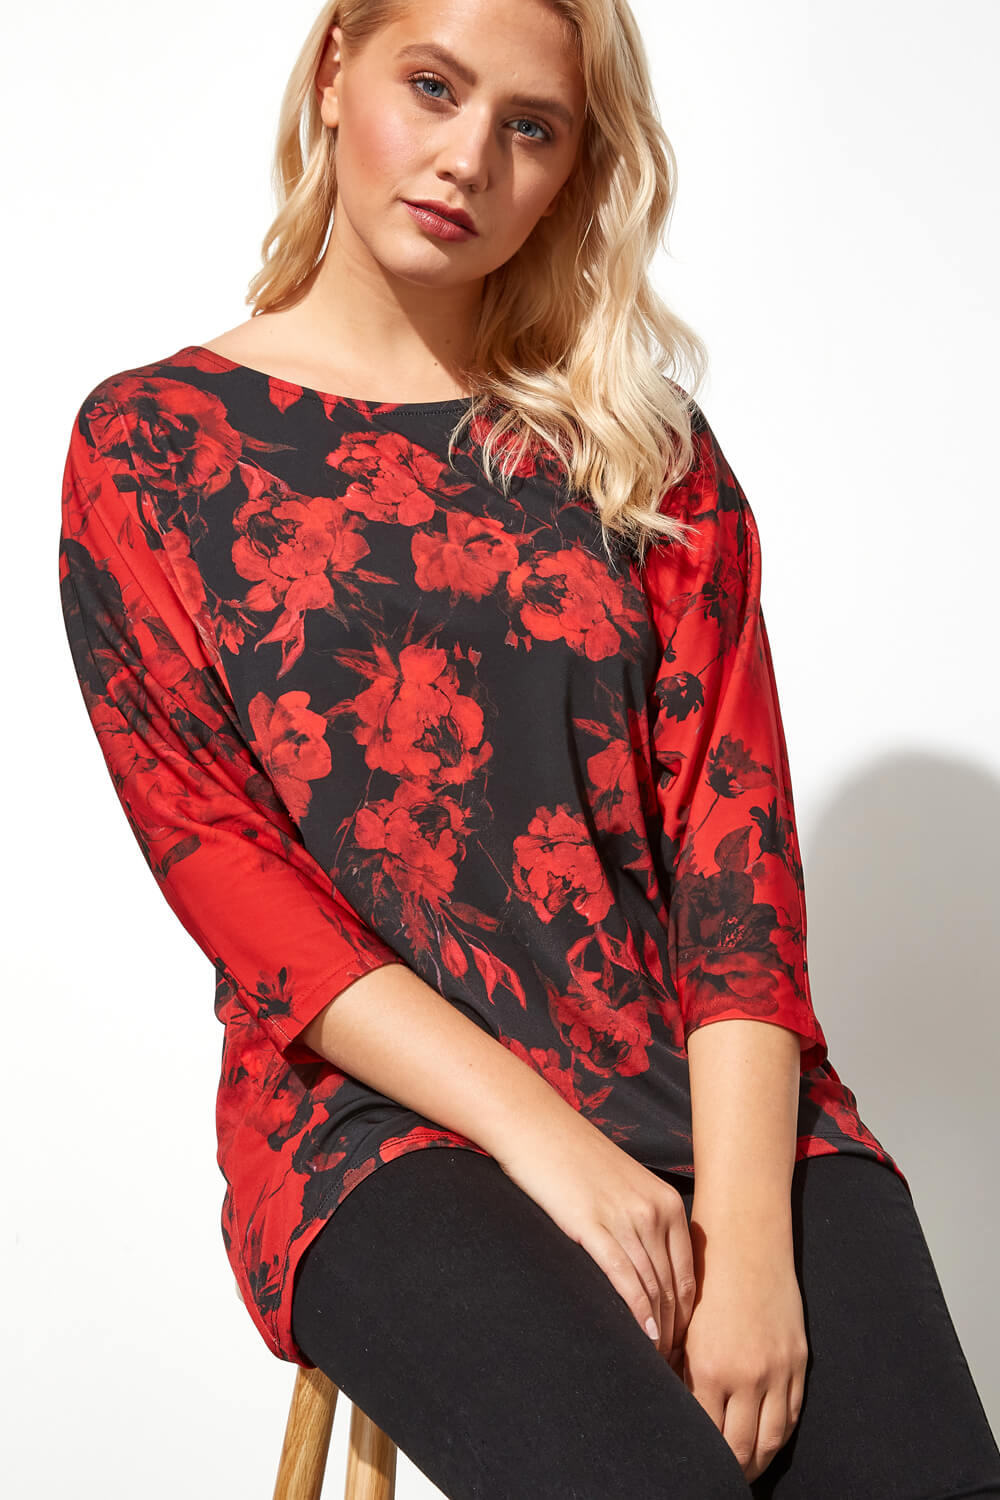 Red Contrast Floral Print Tunic Top, Image 3 of 4